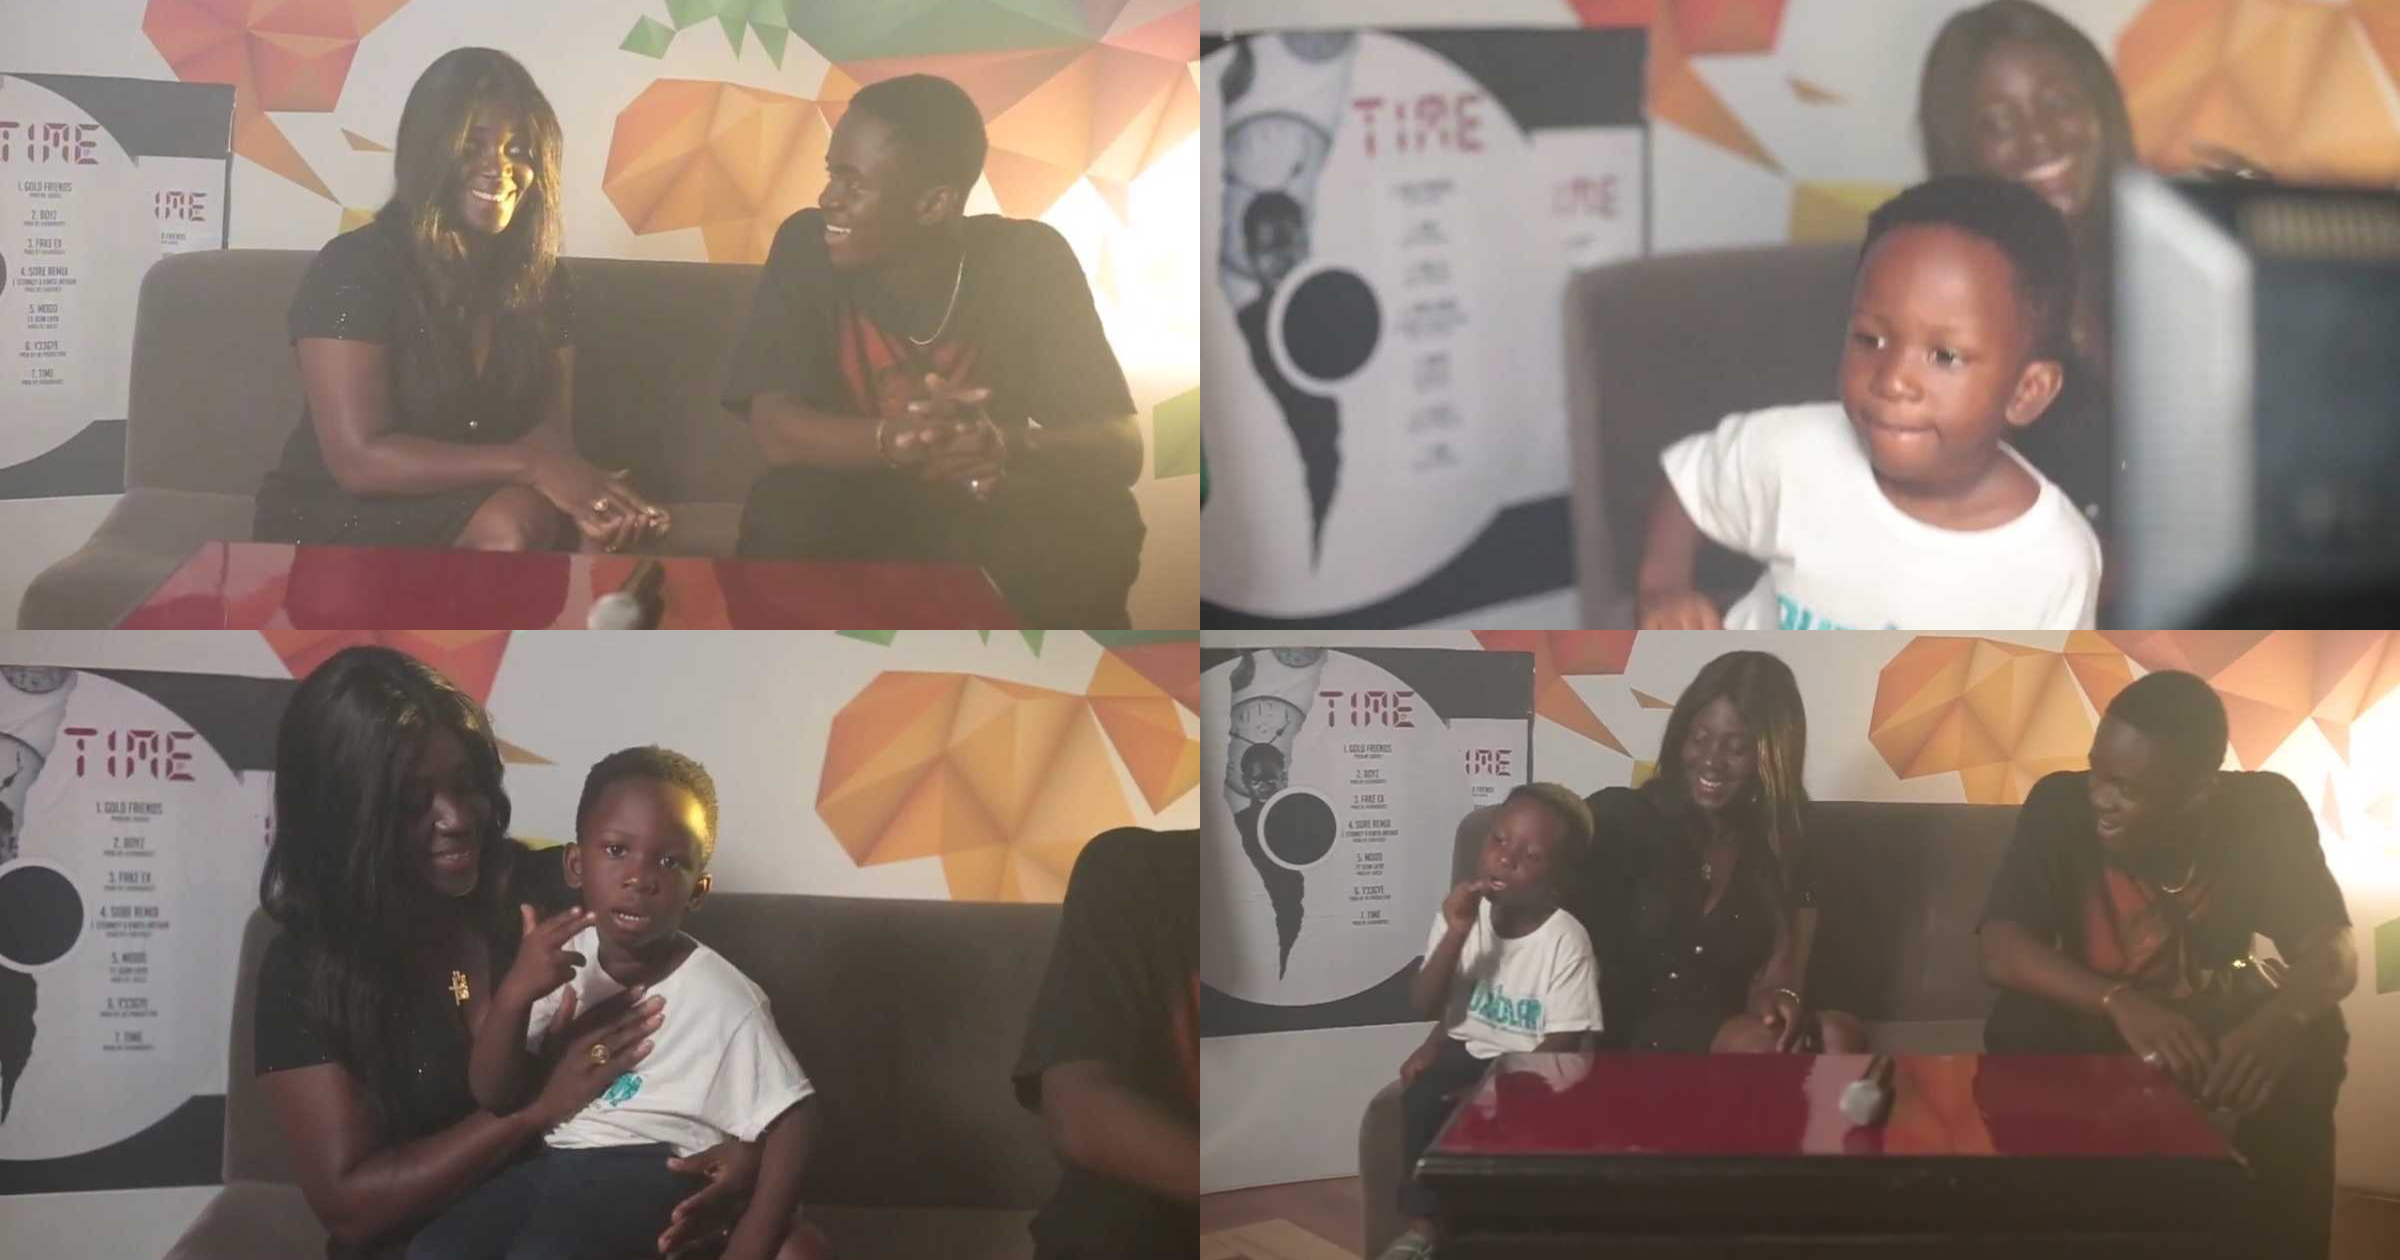 Yaw Tog: Kumerican Rapper's Mother And Little Steals Show At His Time EP Launch (Video)